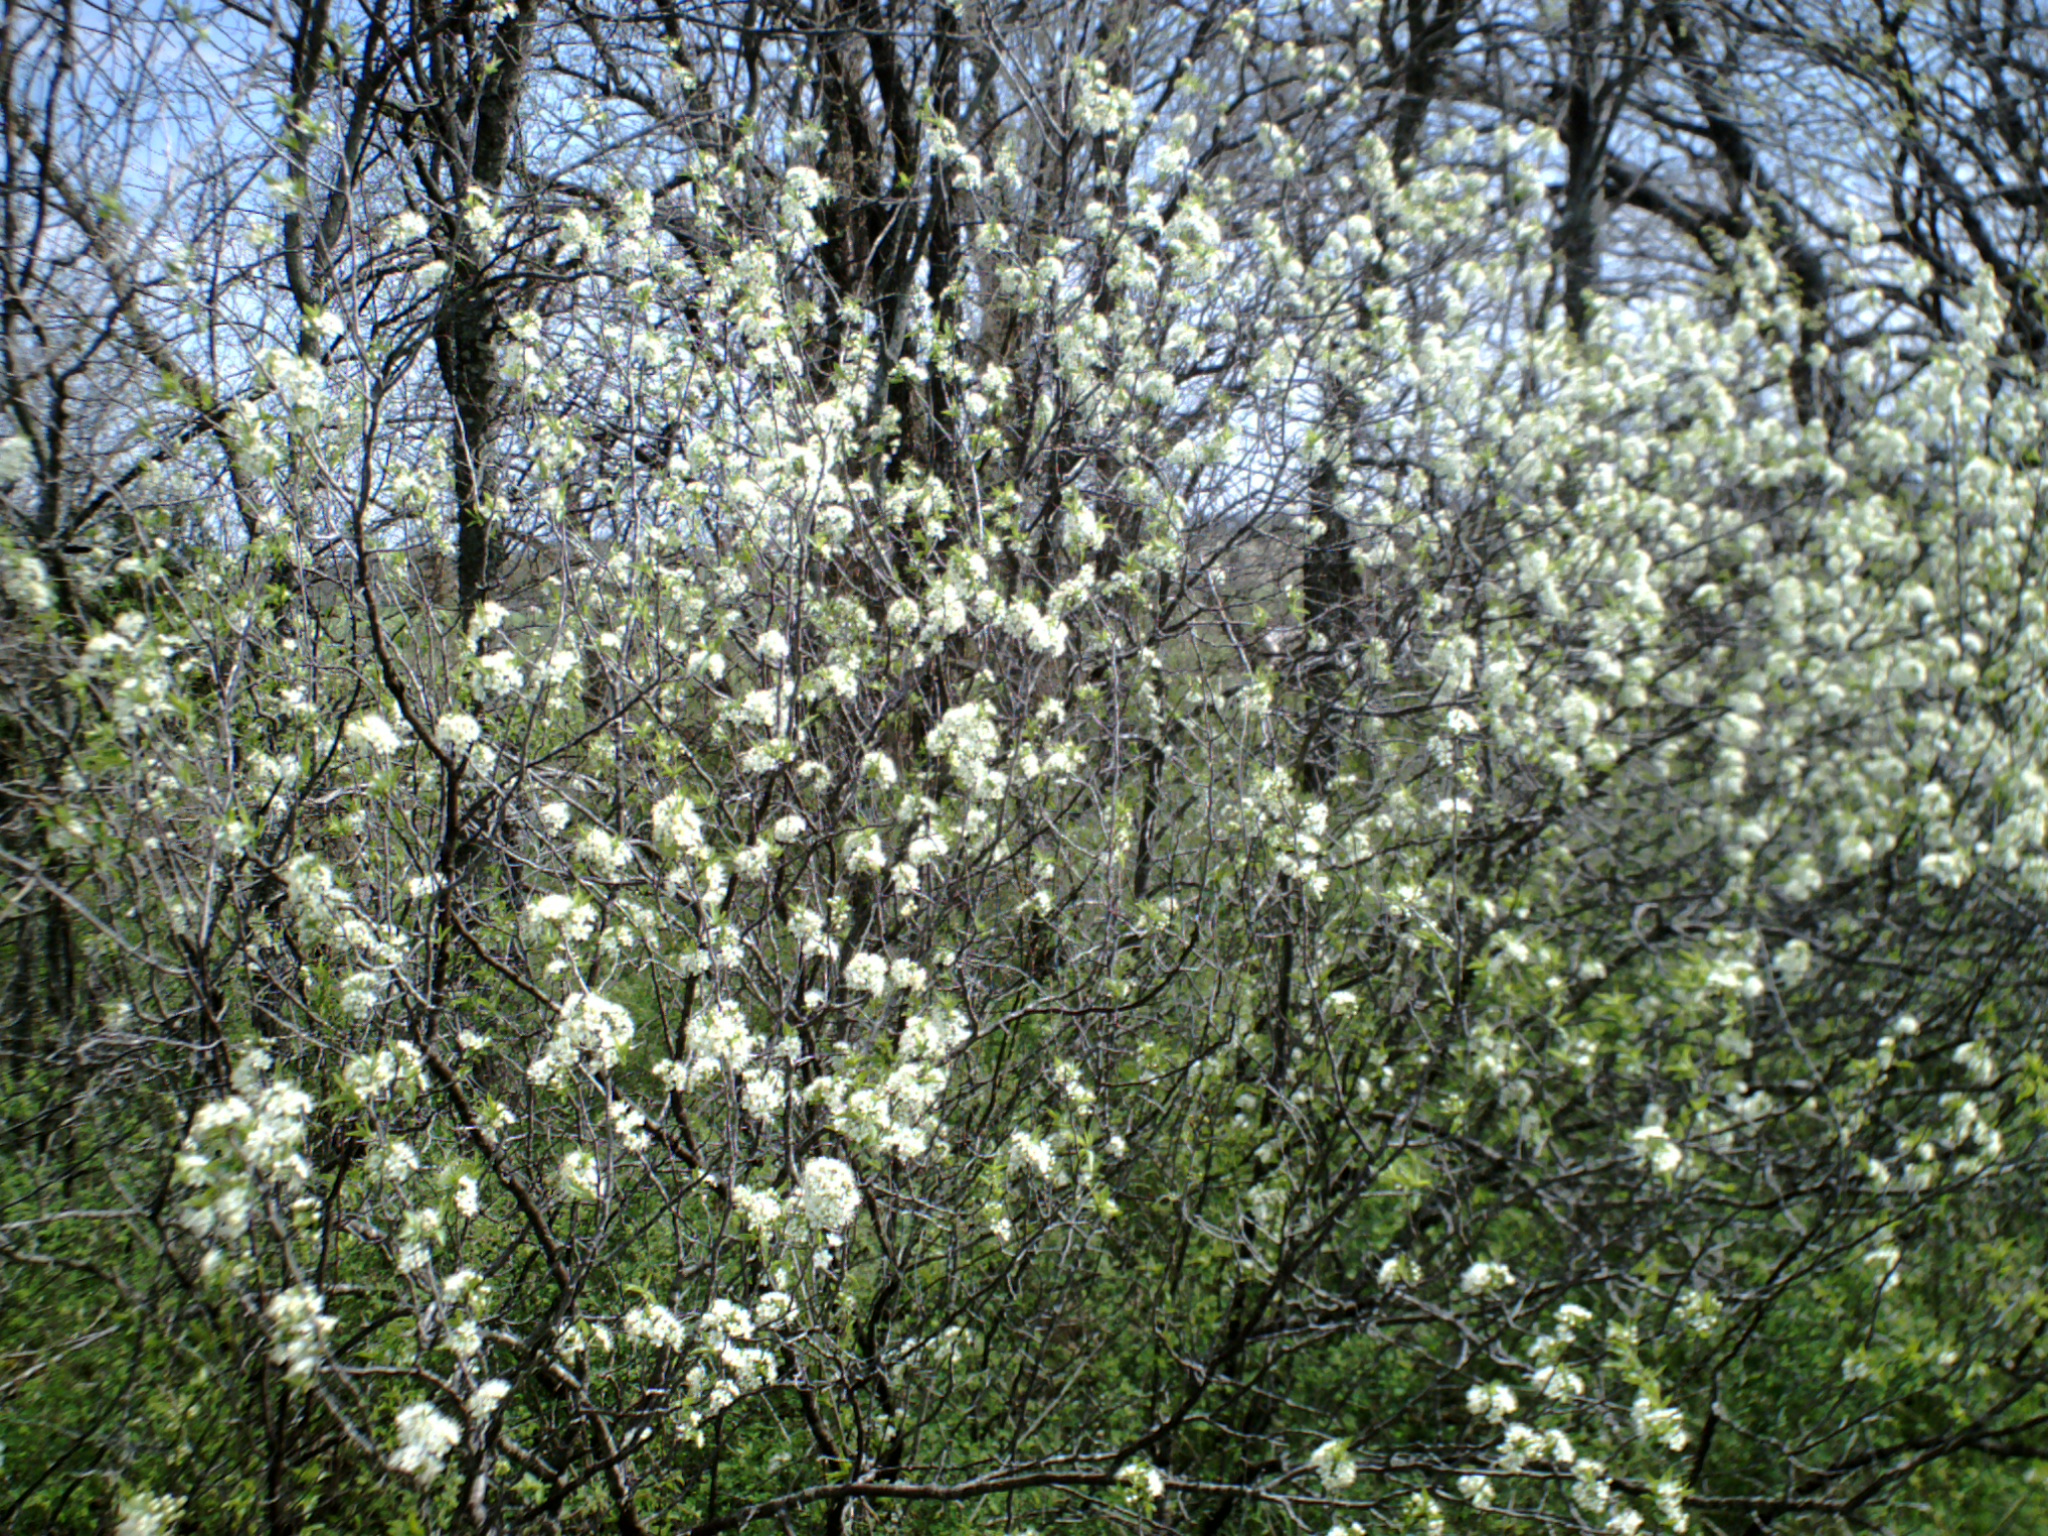 a field with white flowers on trees and bushes